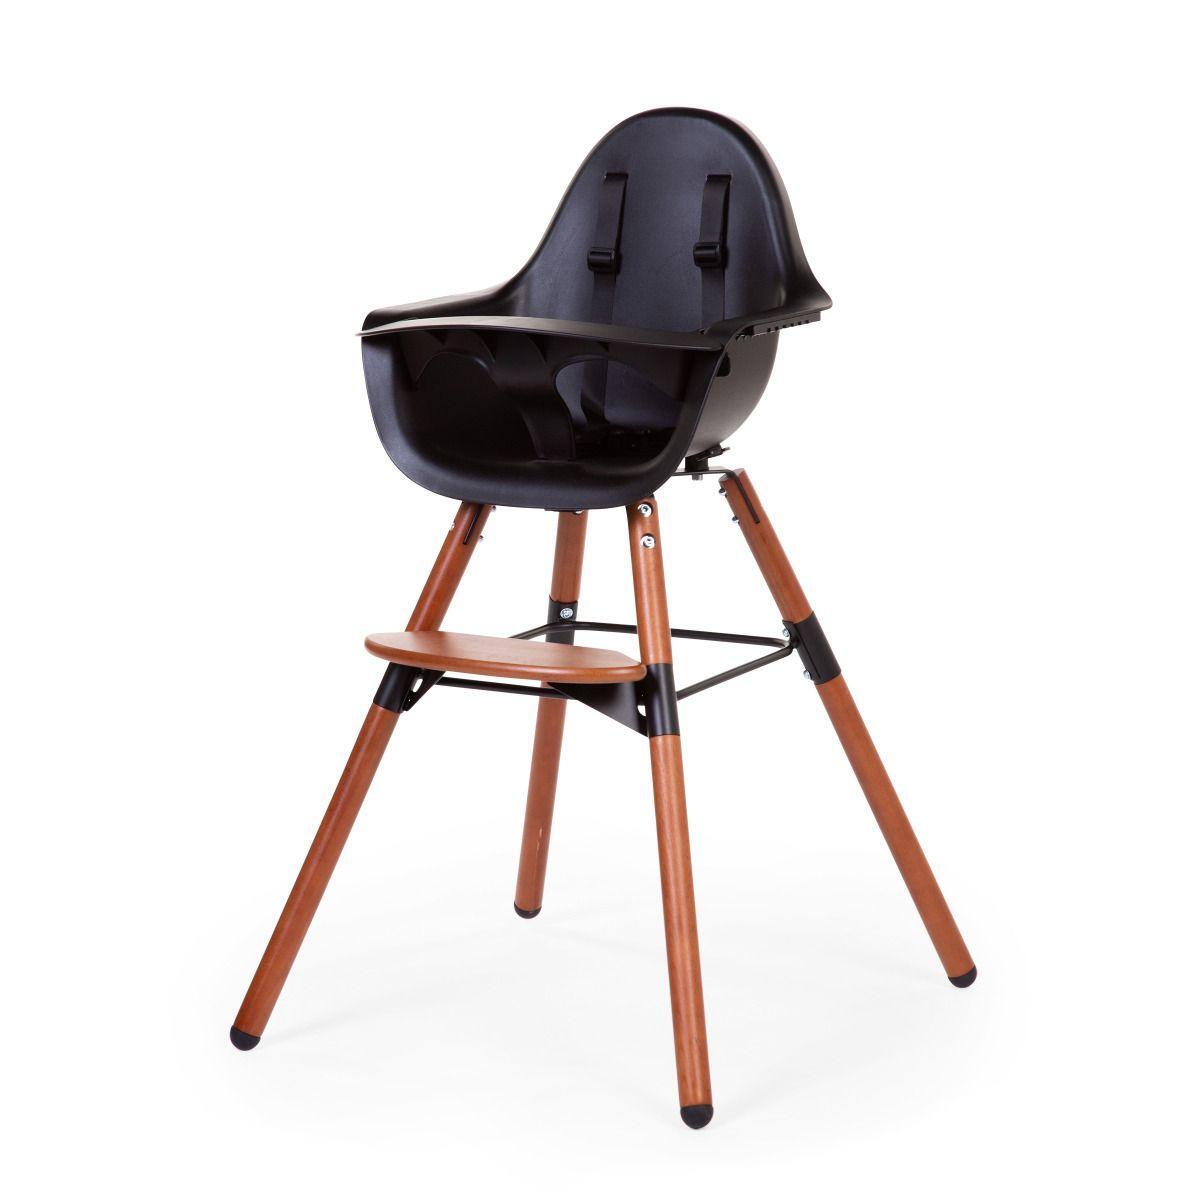 https://www.nordbaby.com/products/images/g120000/128650/eating-chairs-childhome-black-childhome-evolu-2-chair-2in1-with-bumper-nut-black-128650-70117.jpg